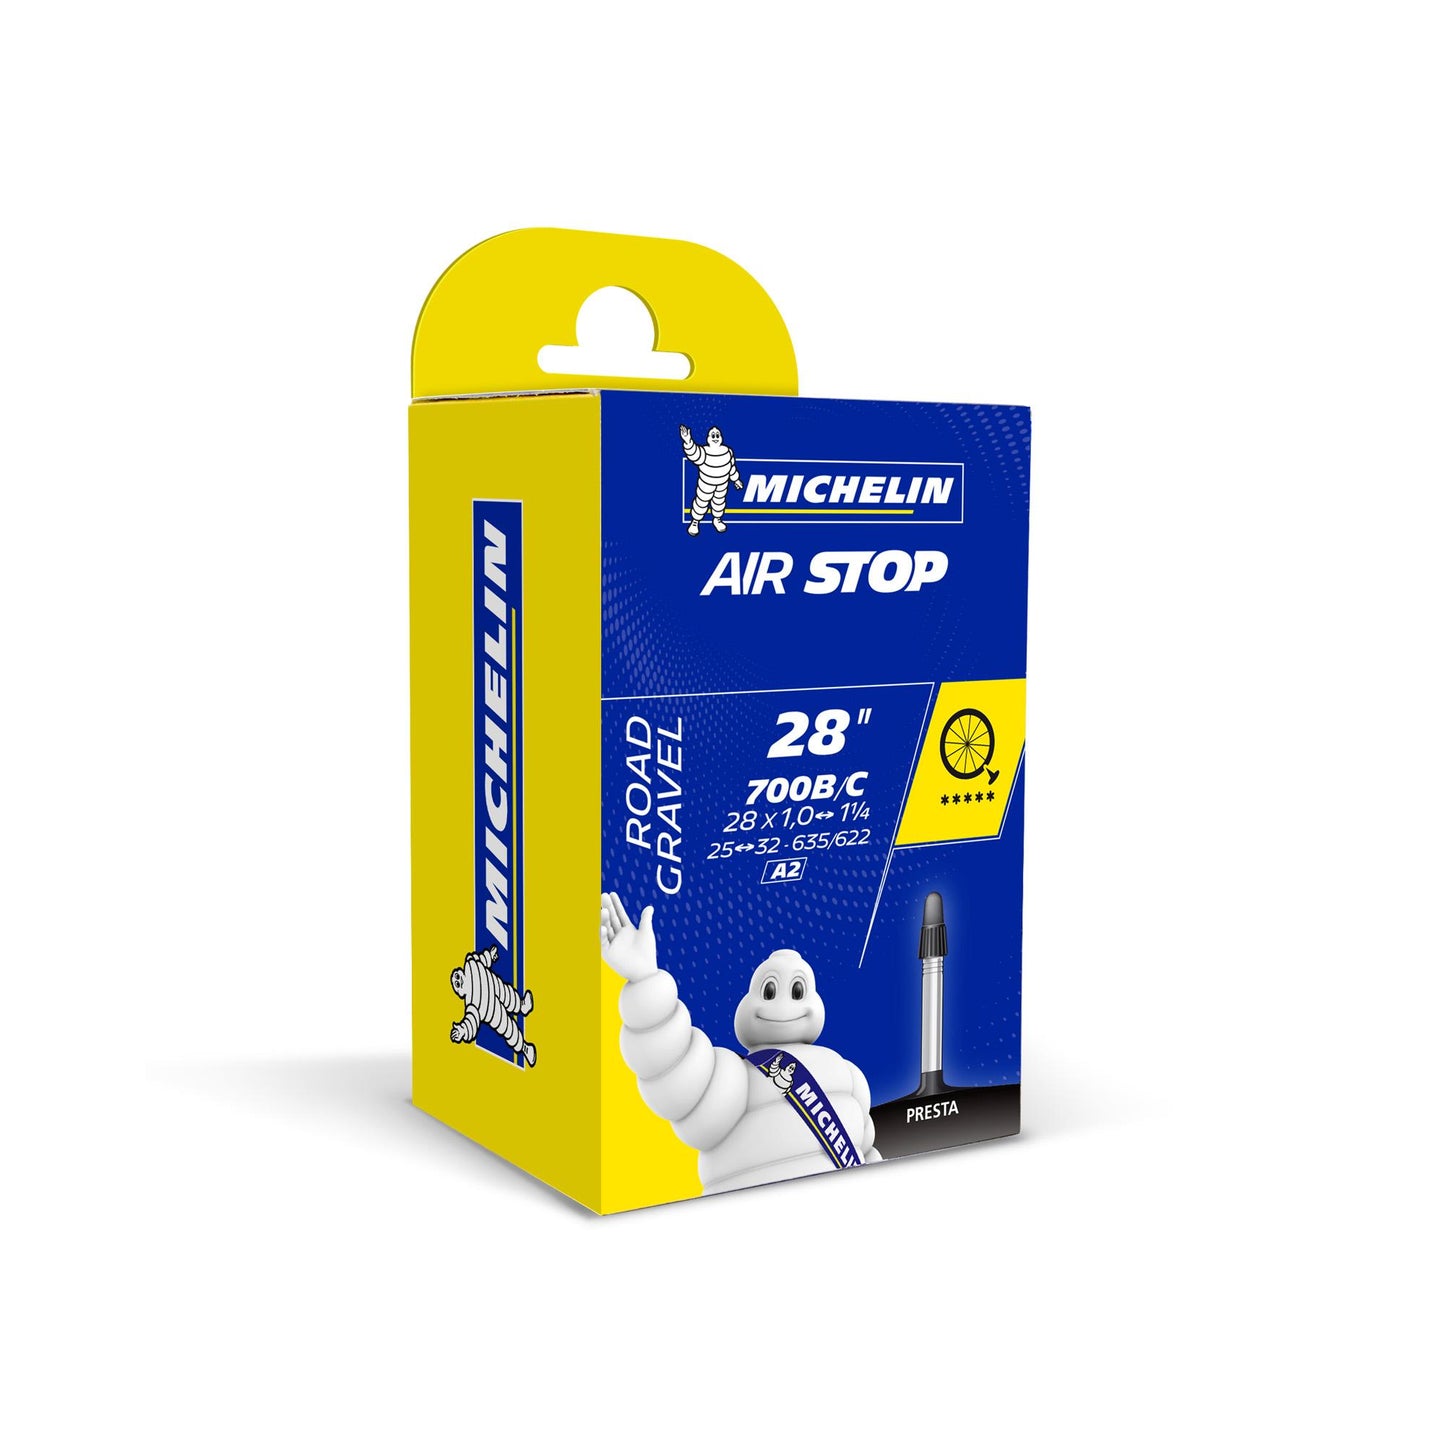 Michelin Airstop Tube